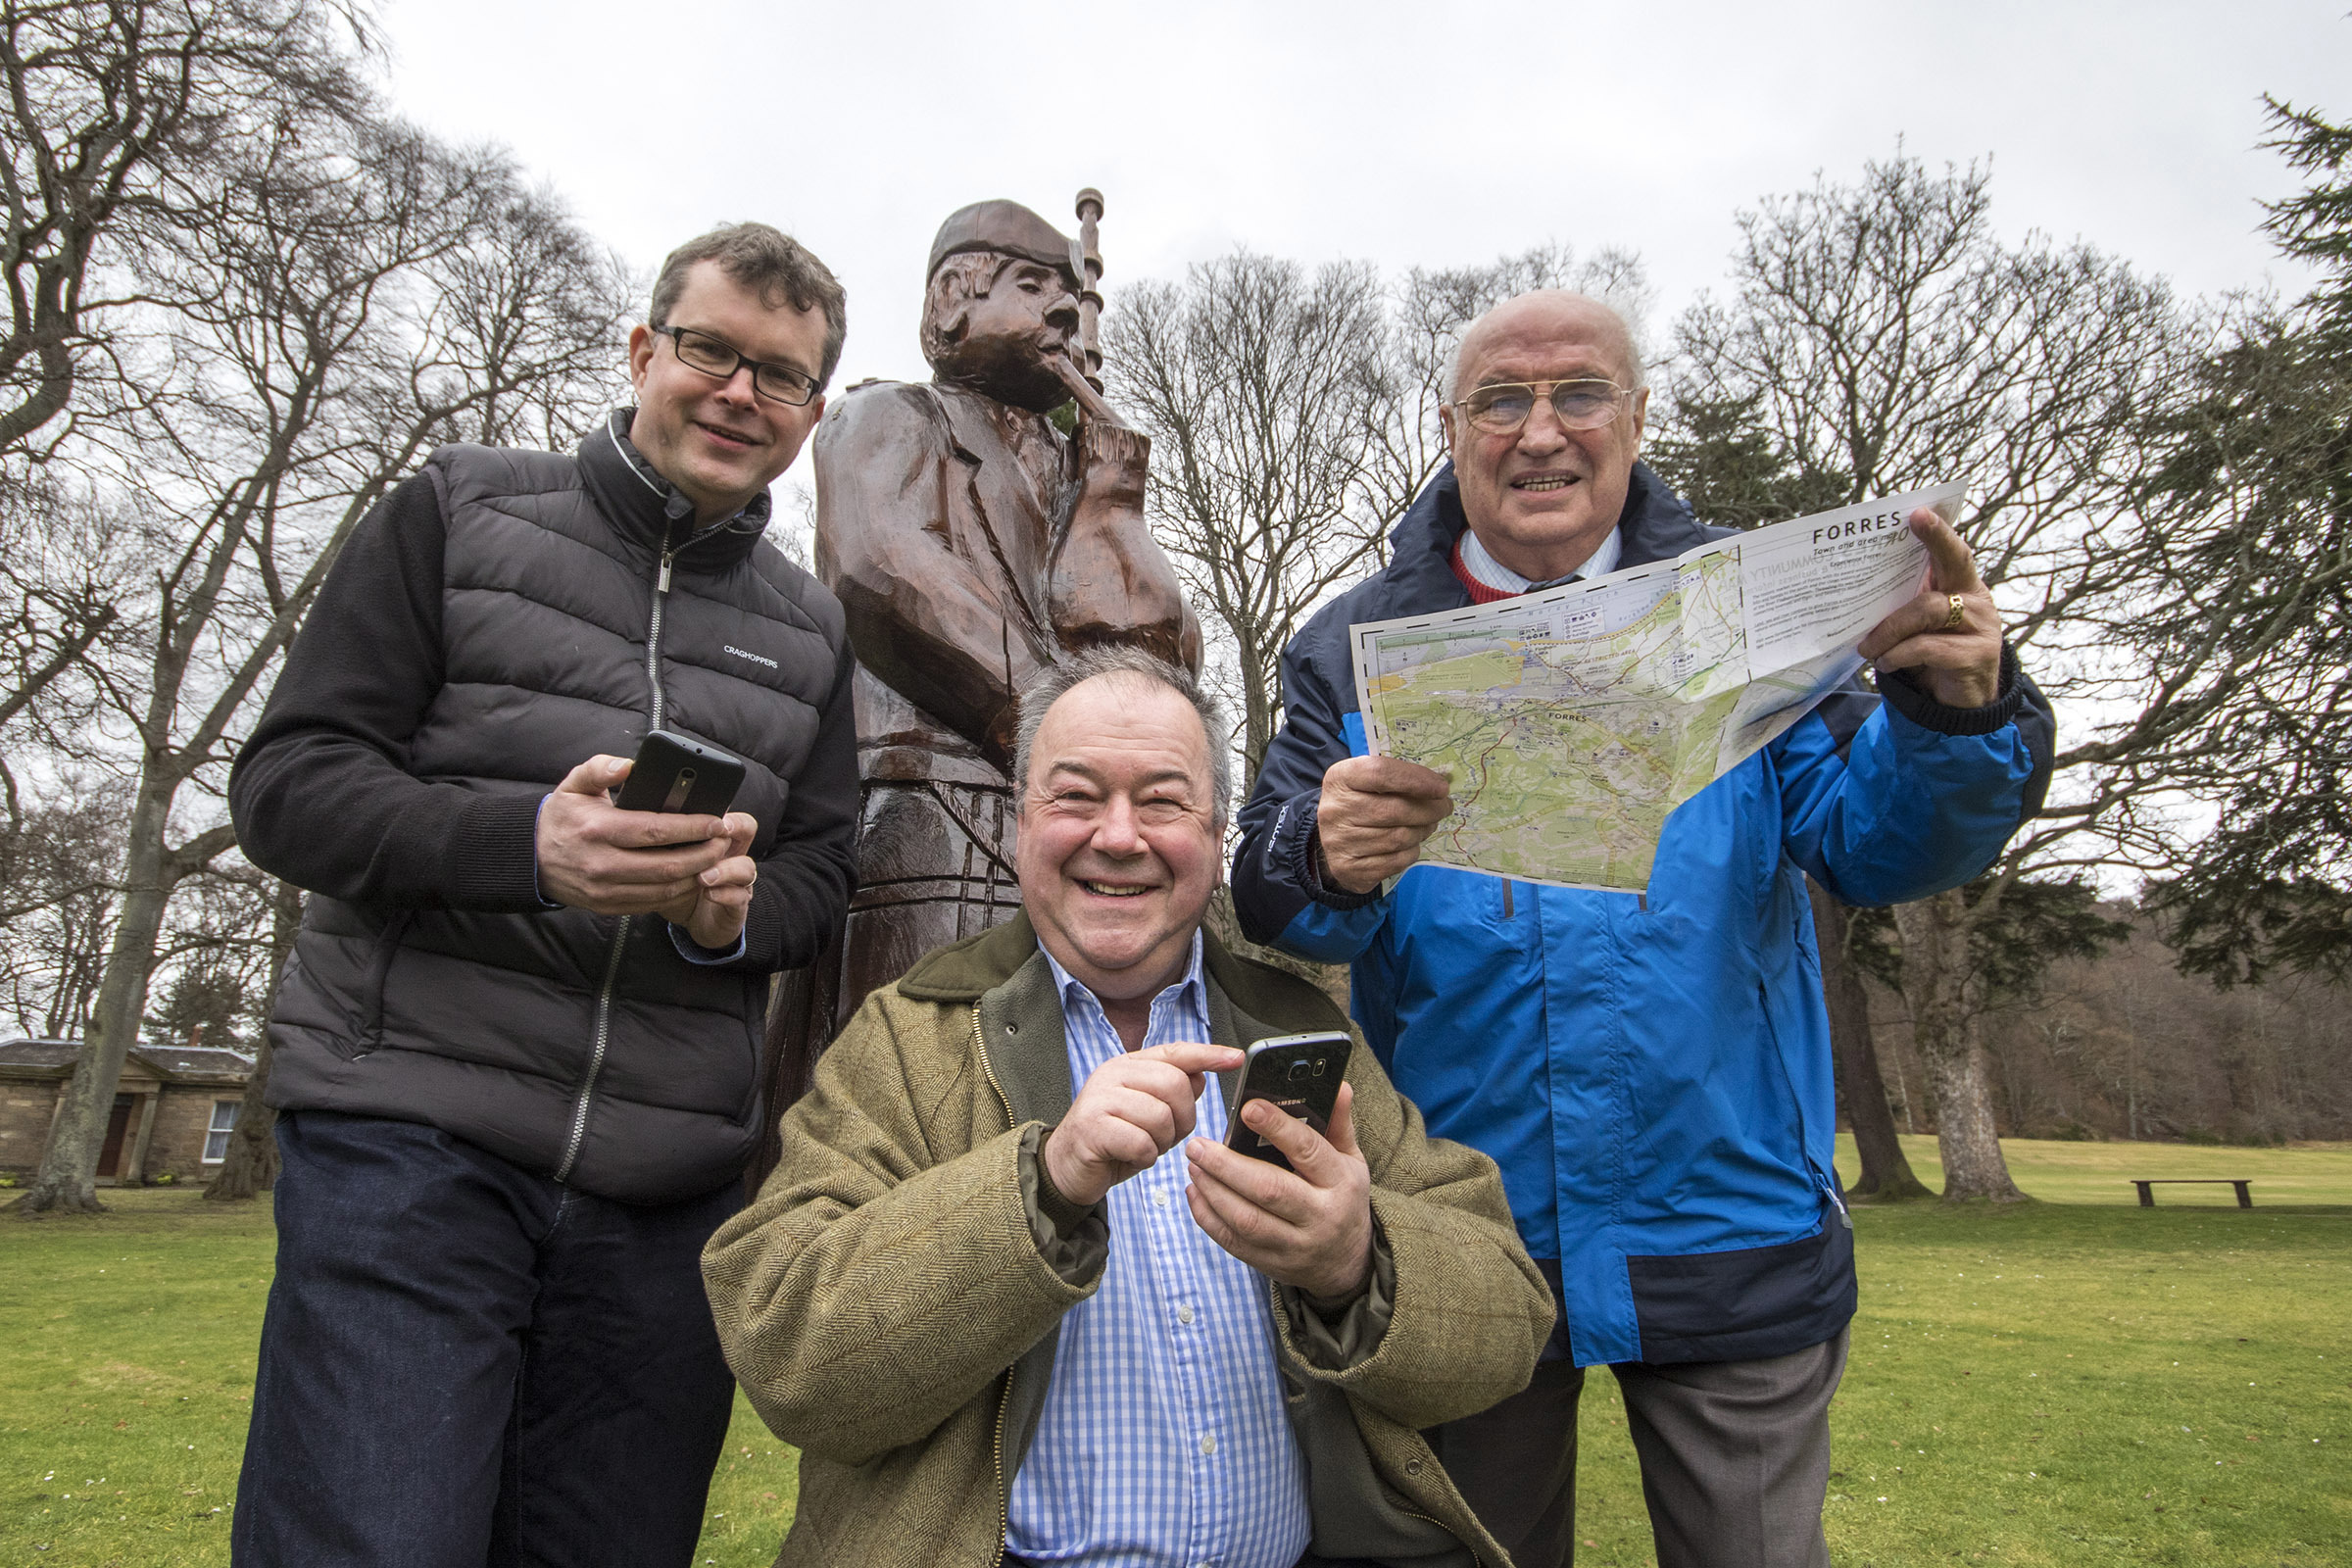 App developer David Sim, Paul Johnson who helped collate the app info and Forres Events director Eddie Tomkinson.